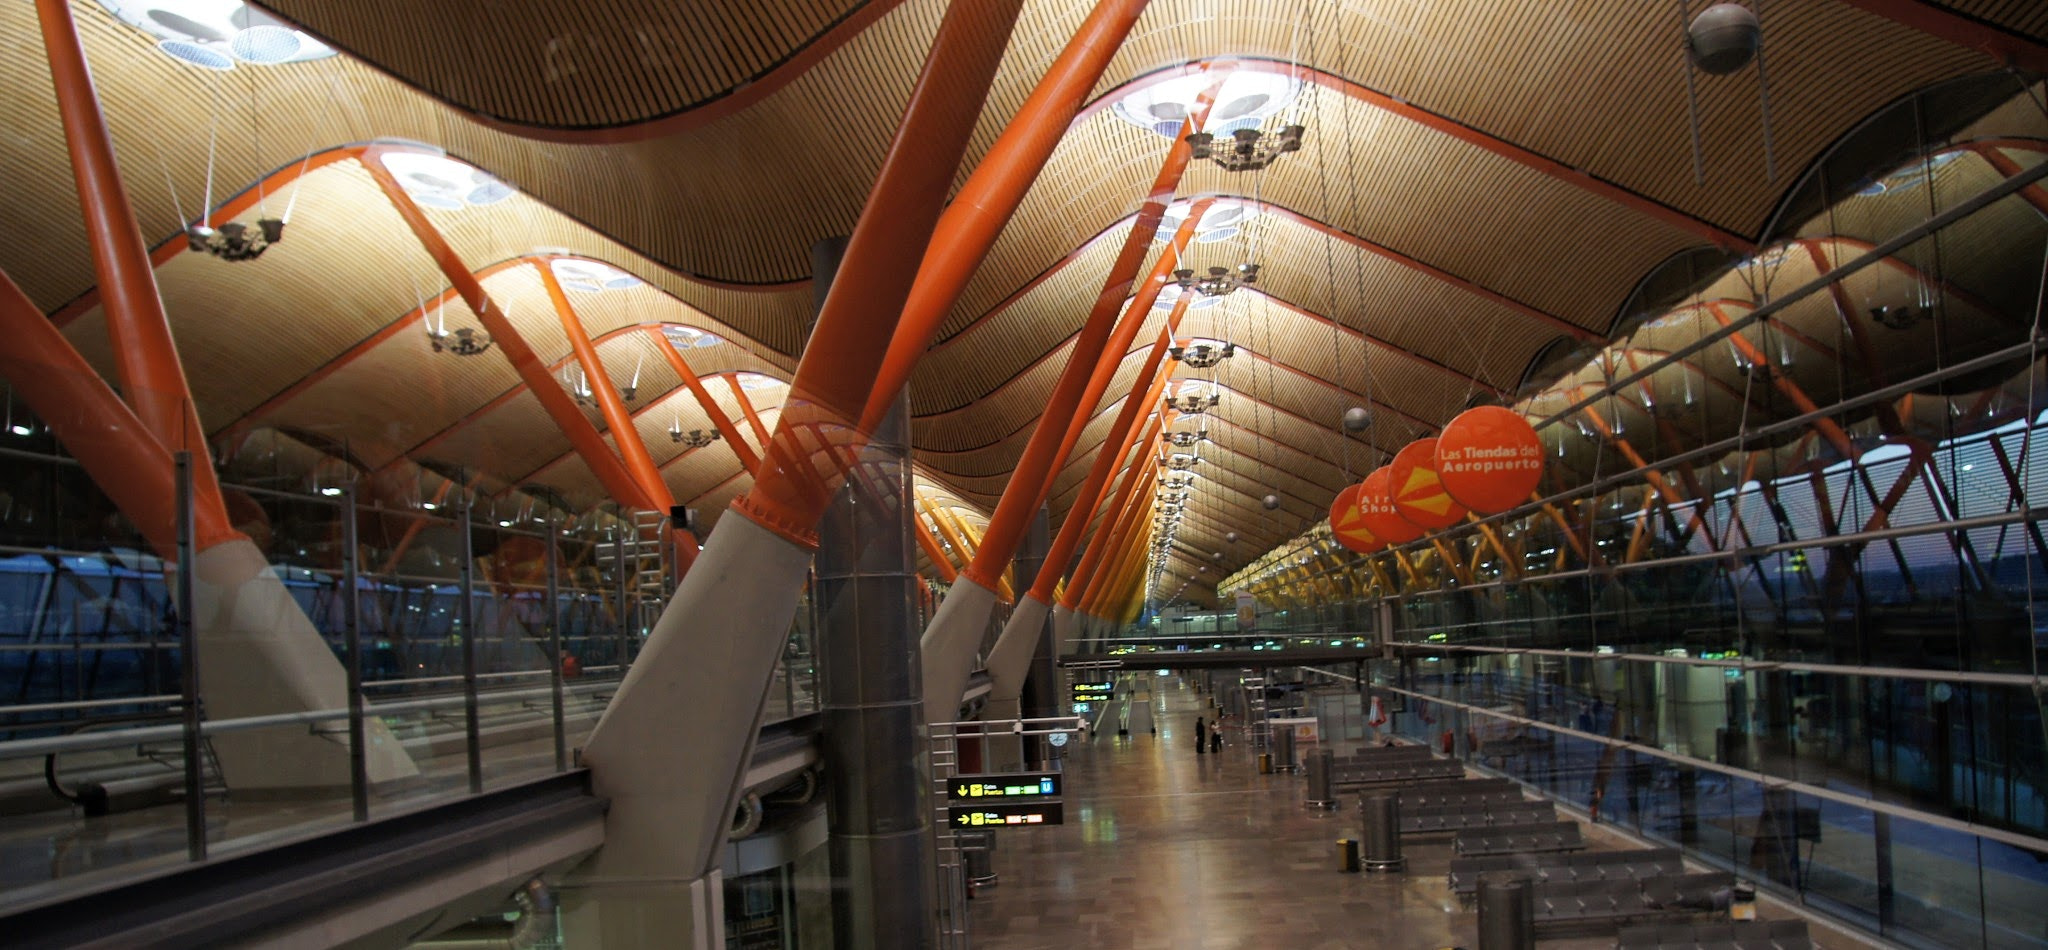 Sony SLT-A33 sample photo. Barajas airport photography